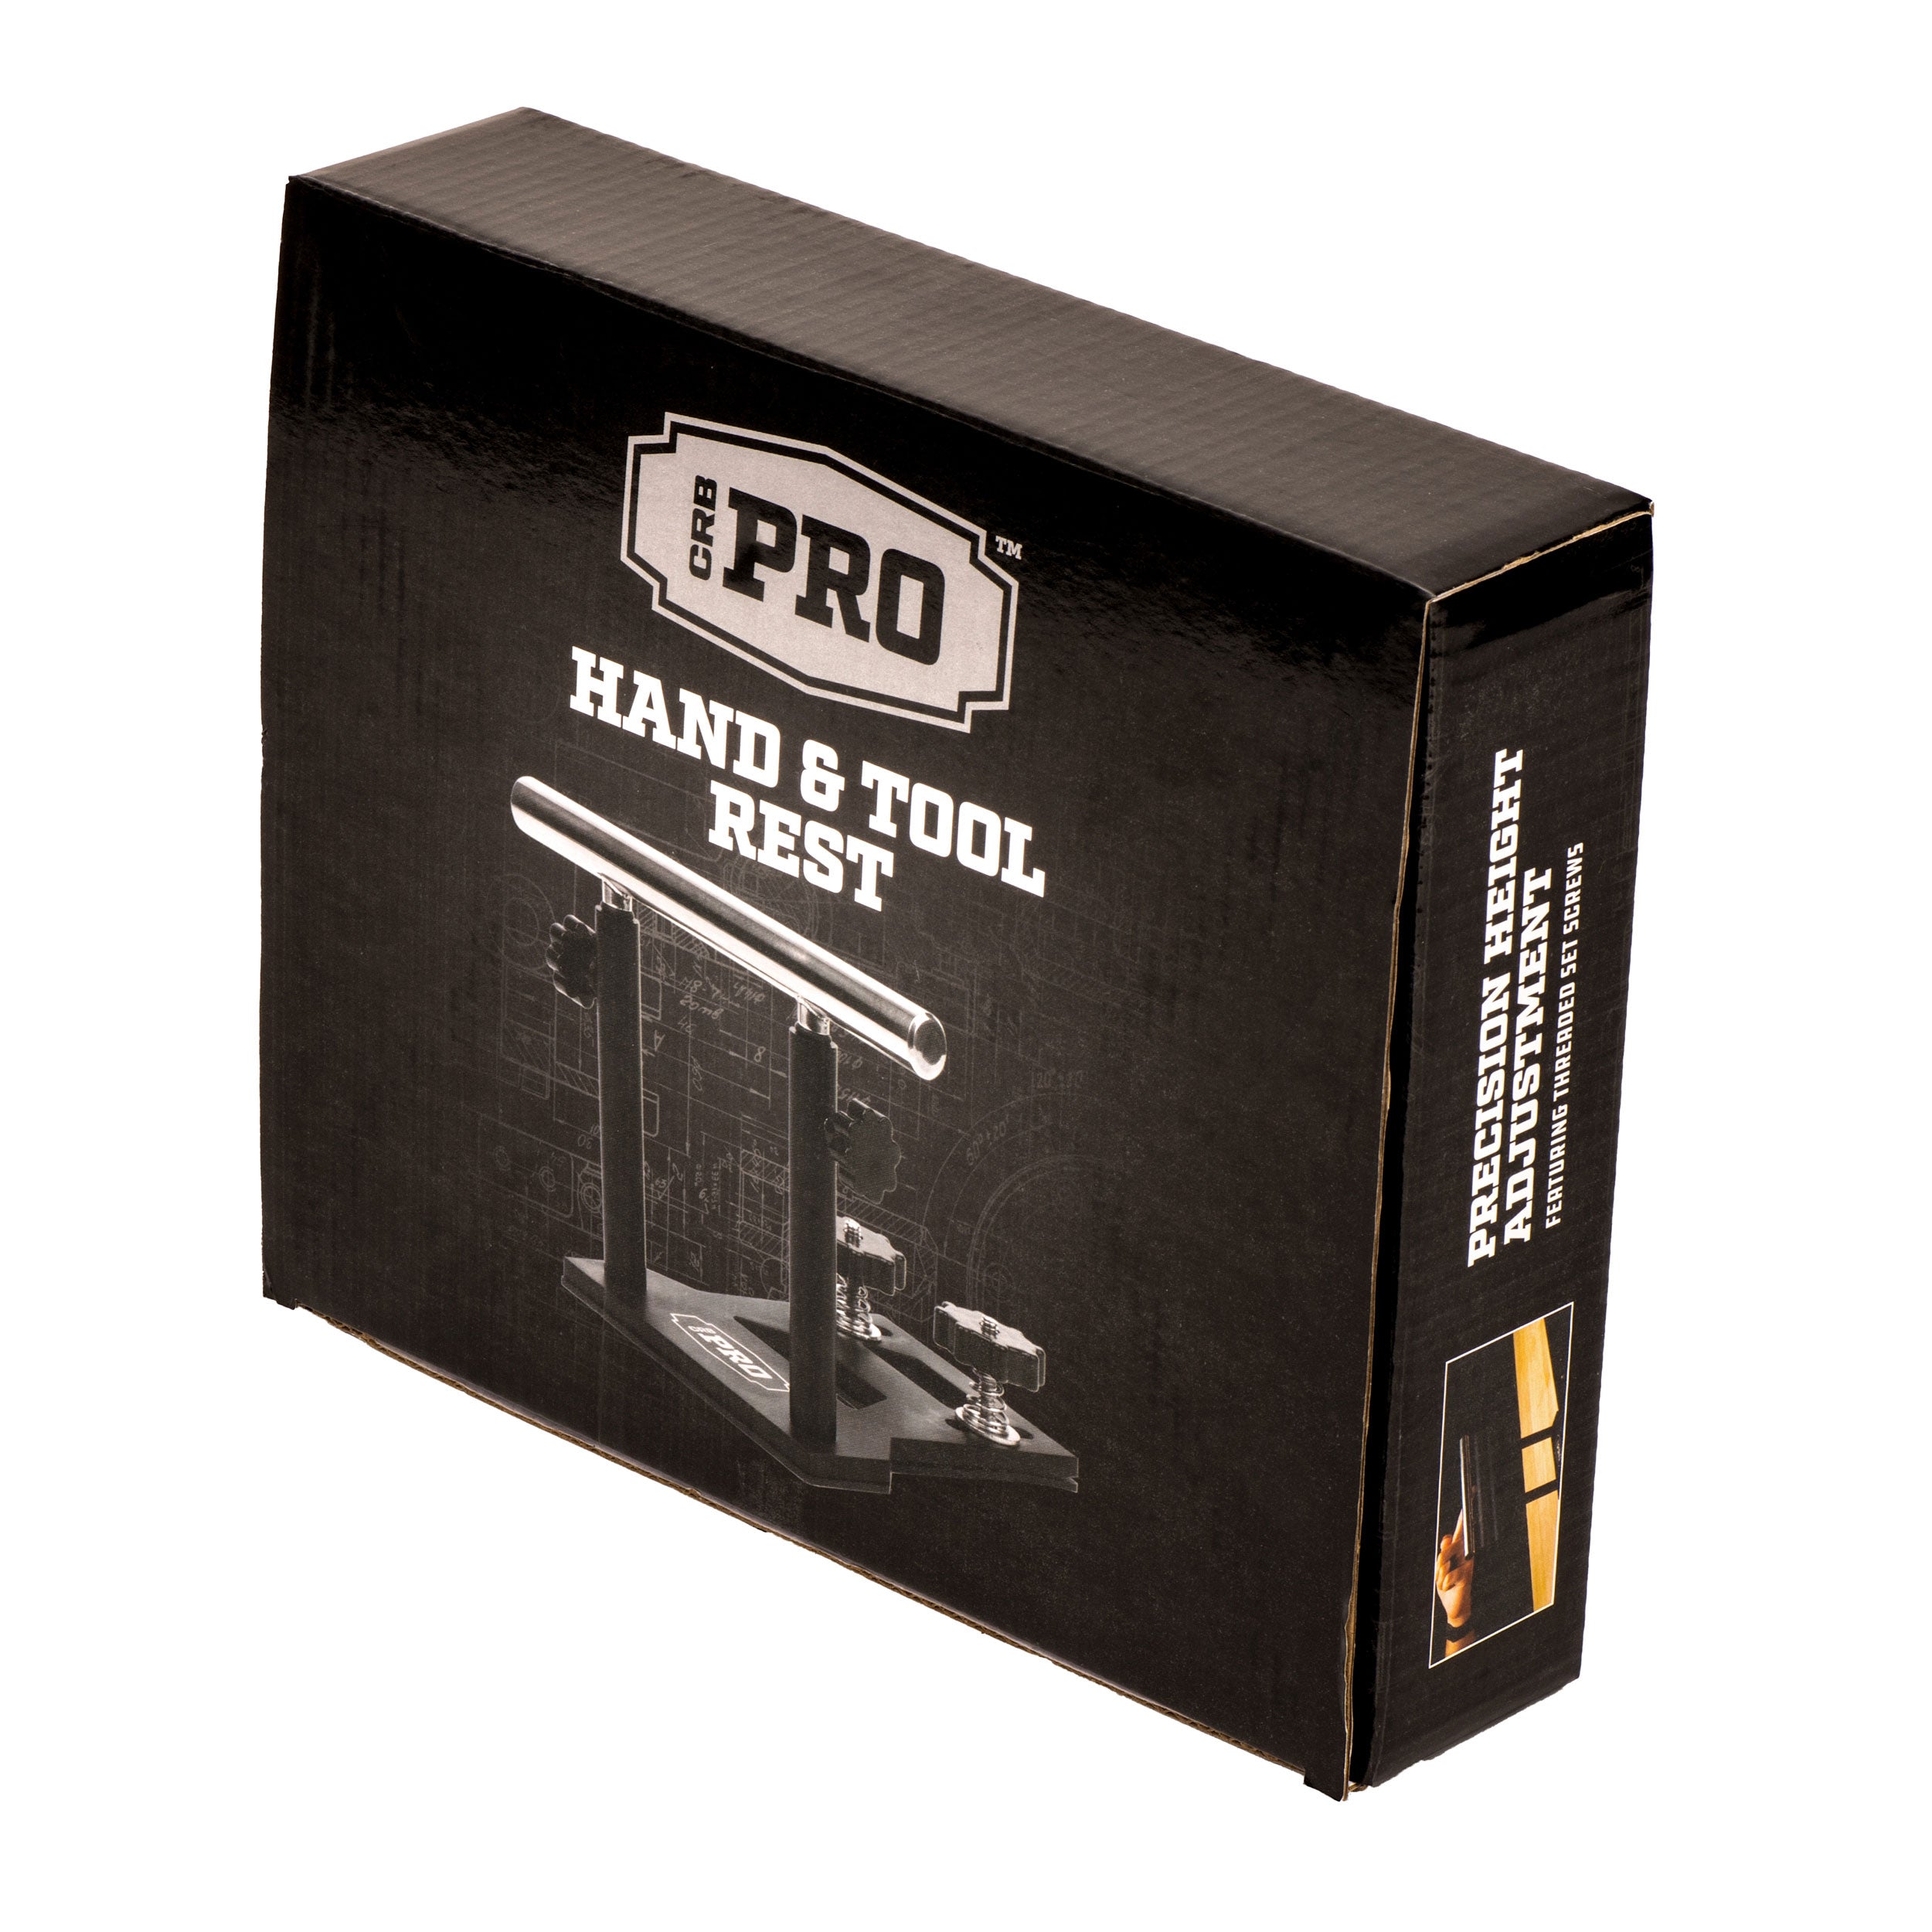 CRB PRO Hand & Tool Rest